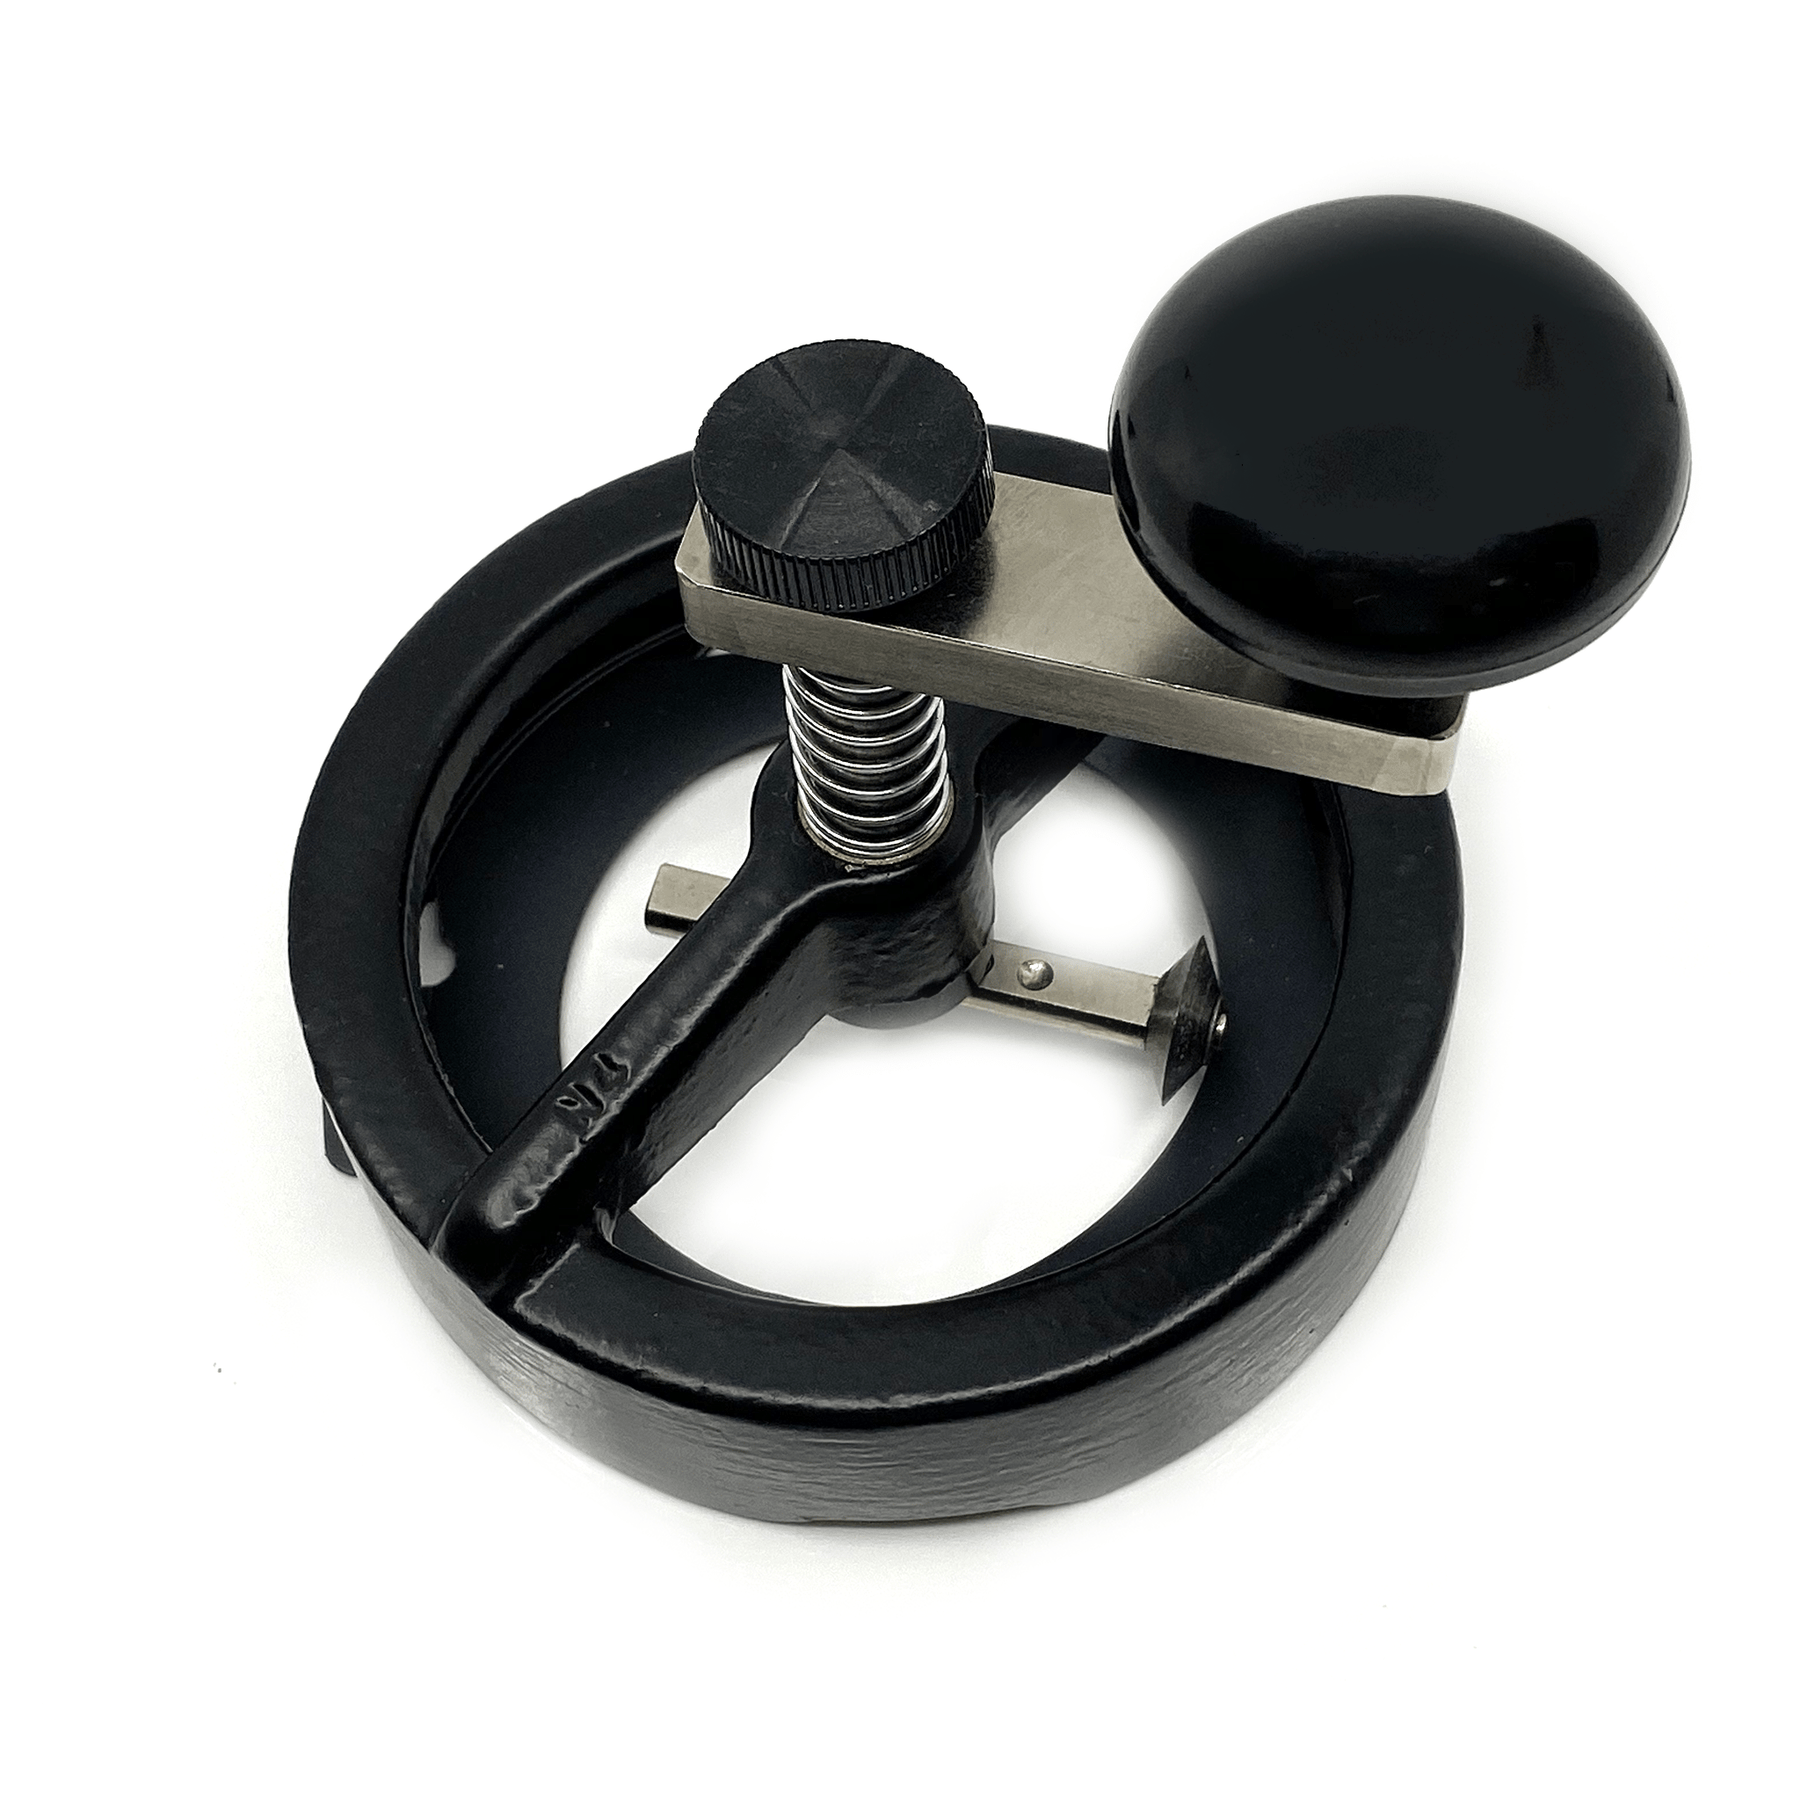 1 Button Boy Fixed Rotary Cutter for making 1 Inch Buttons - Cut Size is  1.313-FREE SHIPPING - Button Boy